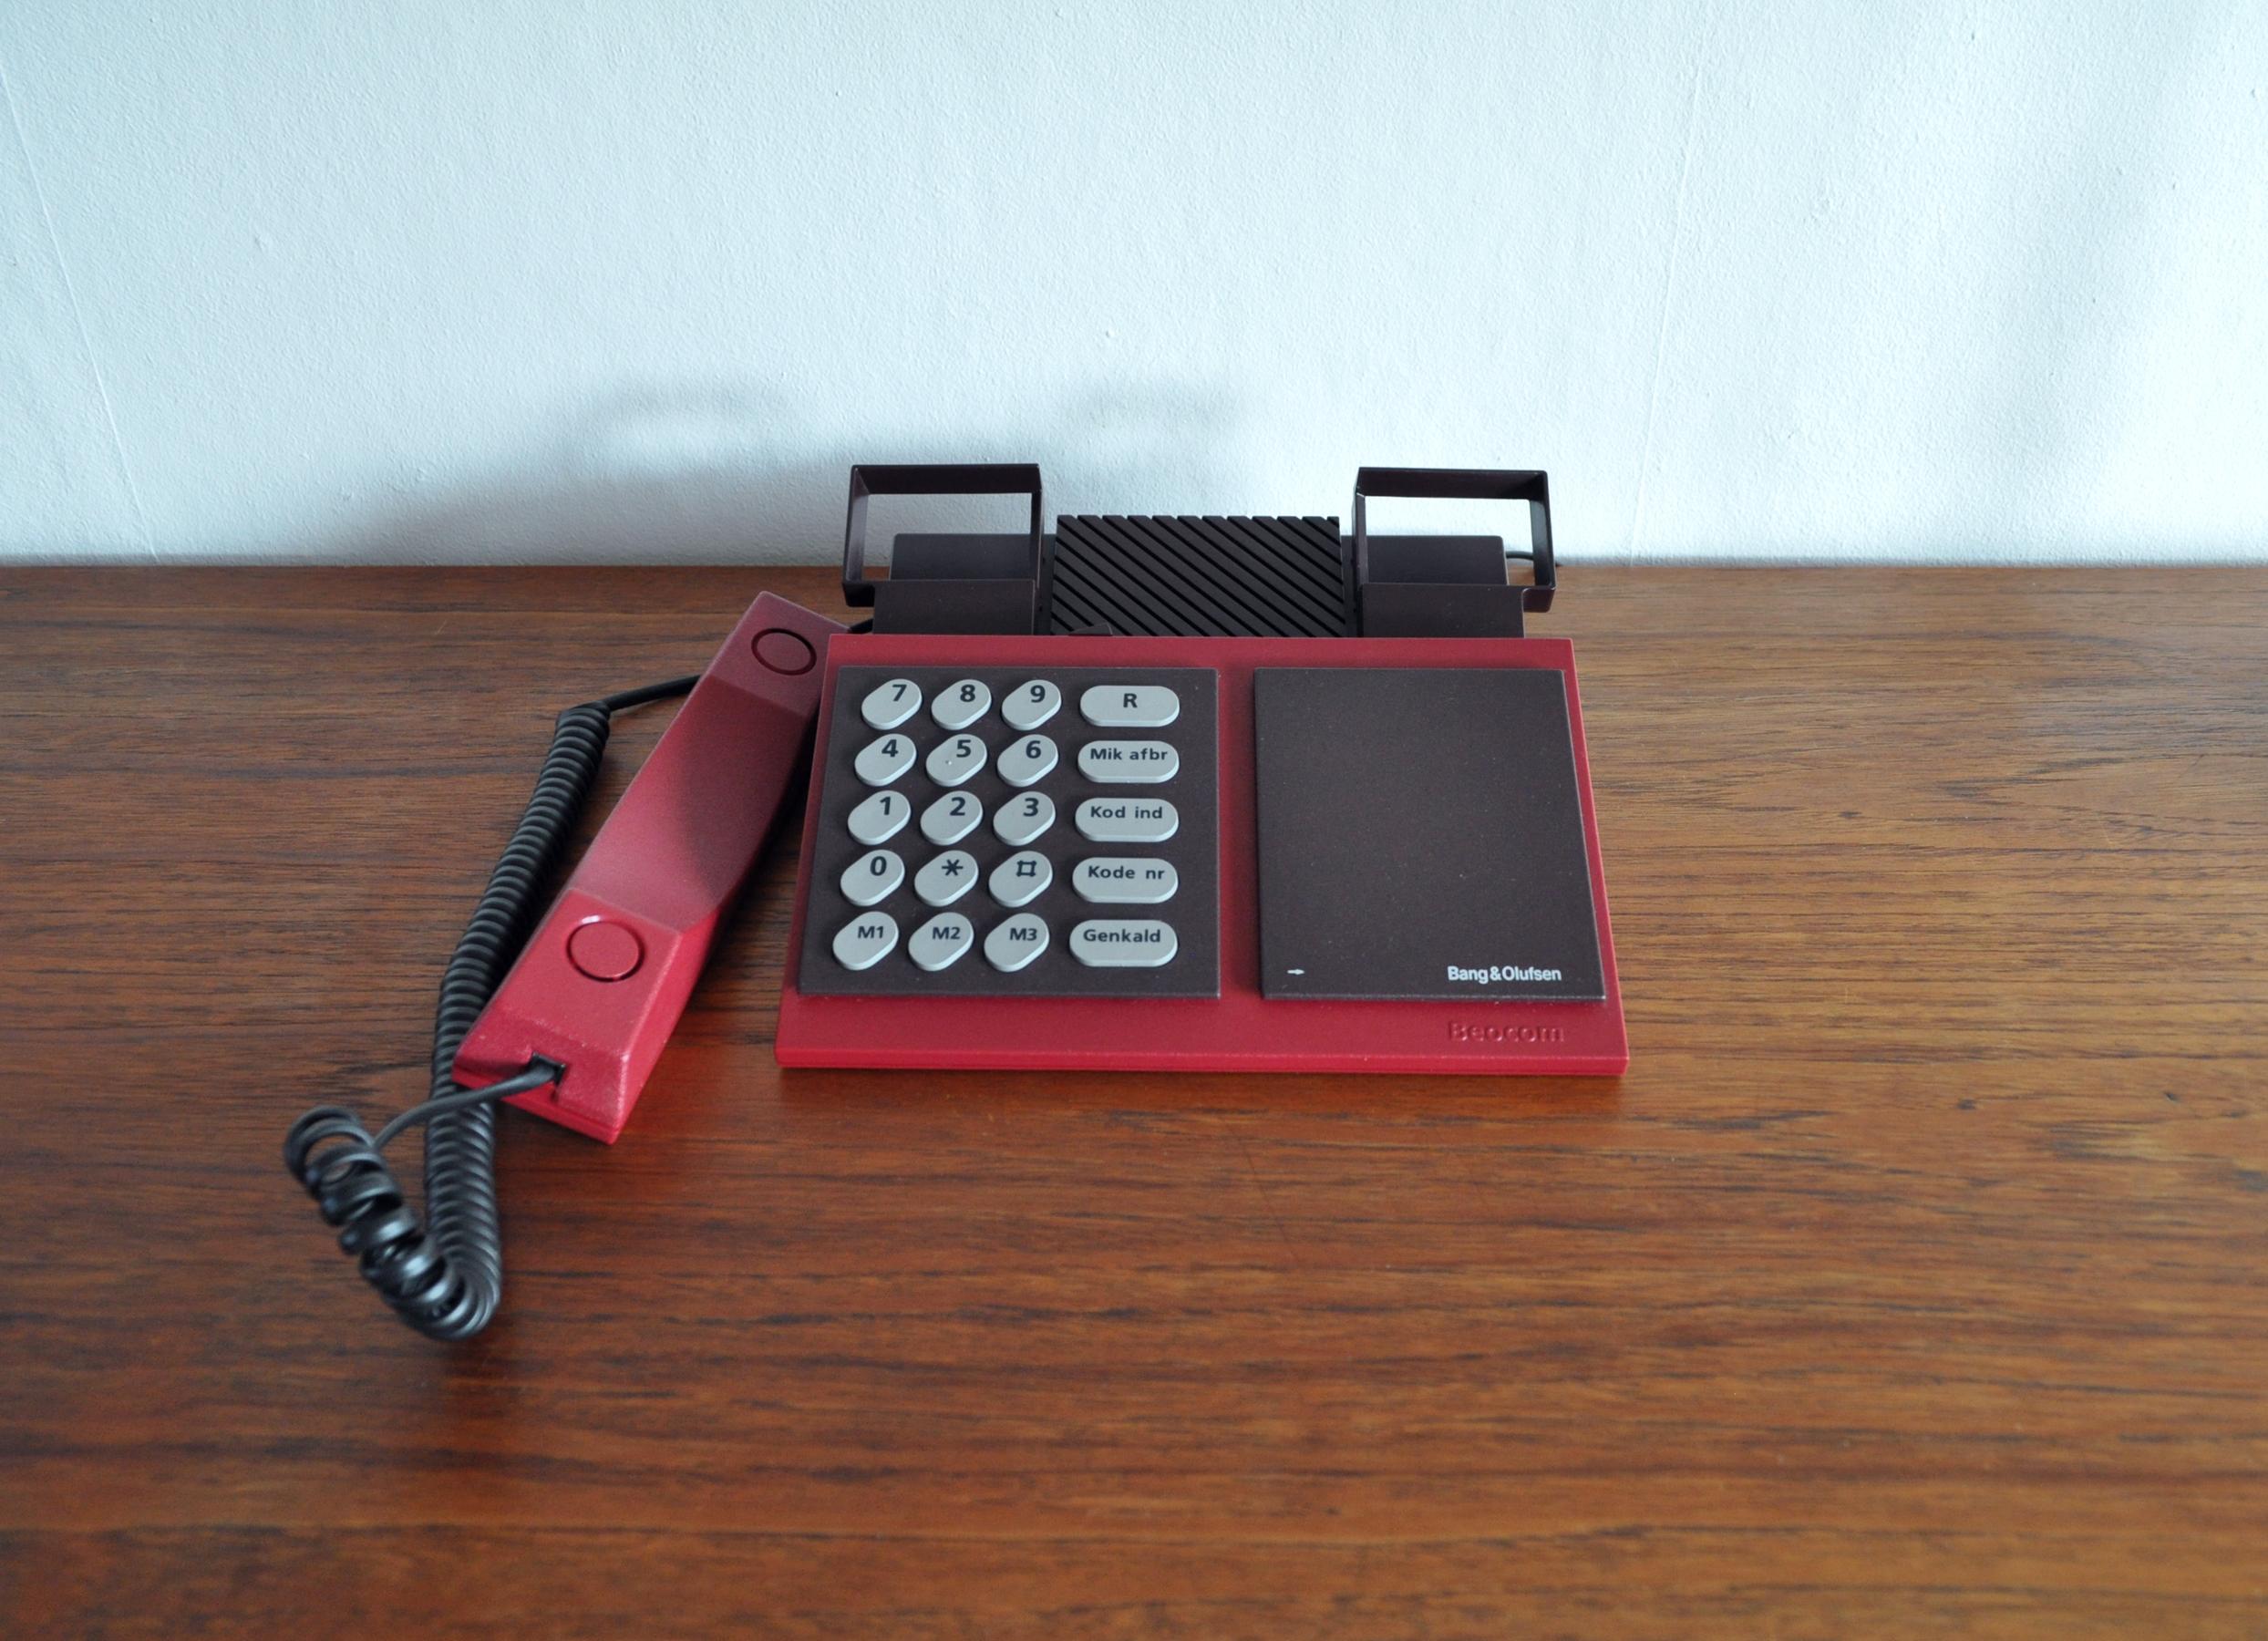 Iconic Beocom 600 Telephone from 1986 by Bang & Olusfen In Good Condition For Sale In Vordingborg, DK